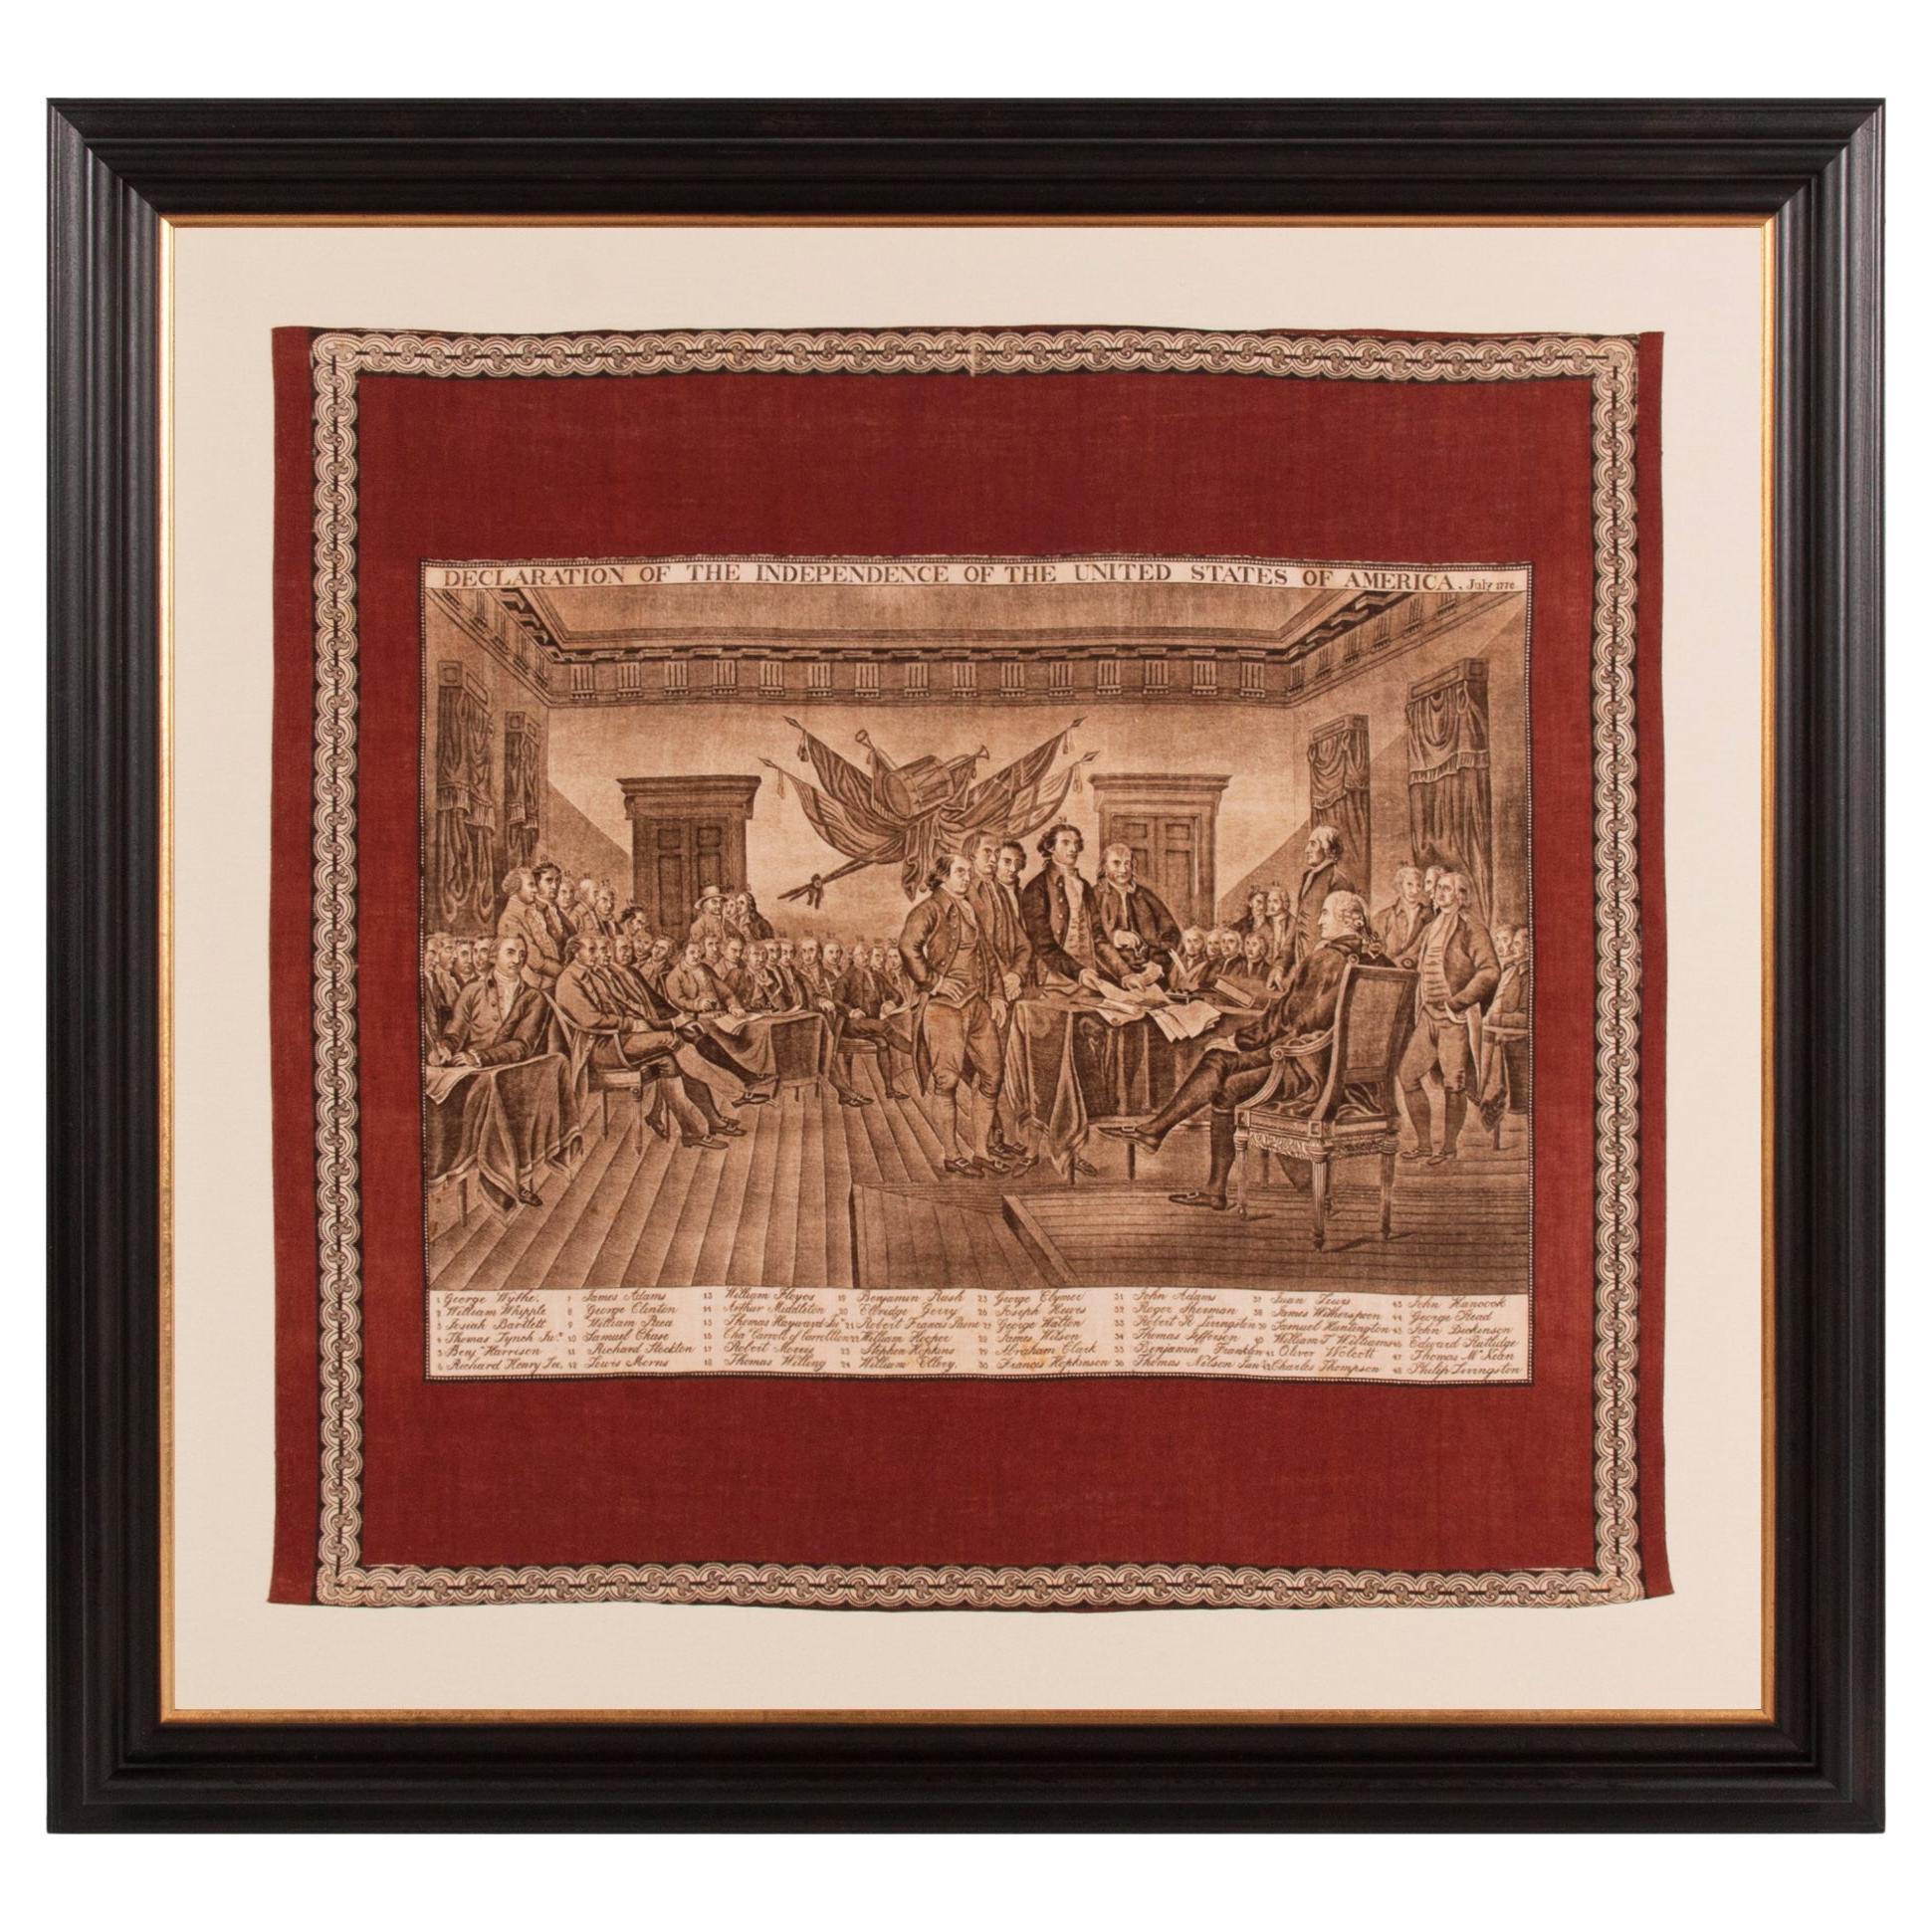 Large Scale Printed Kerchief of the Signing of the Declaration of Independence